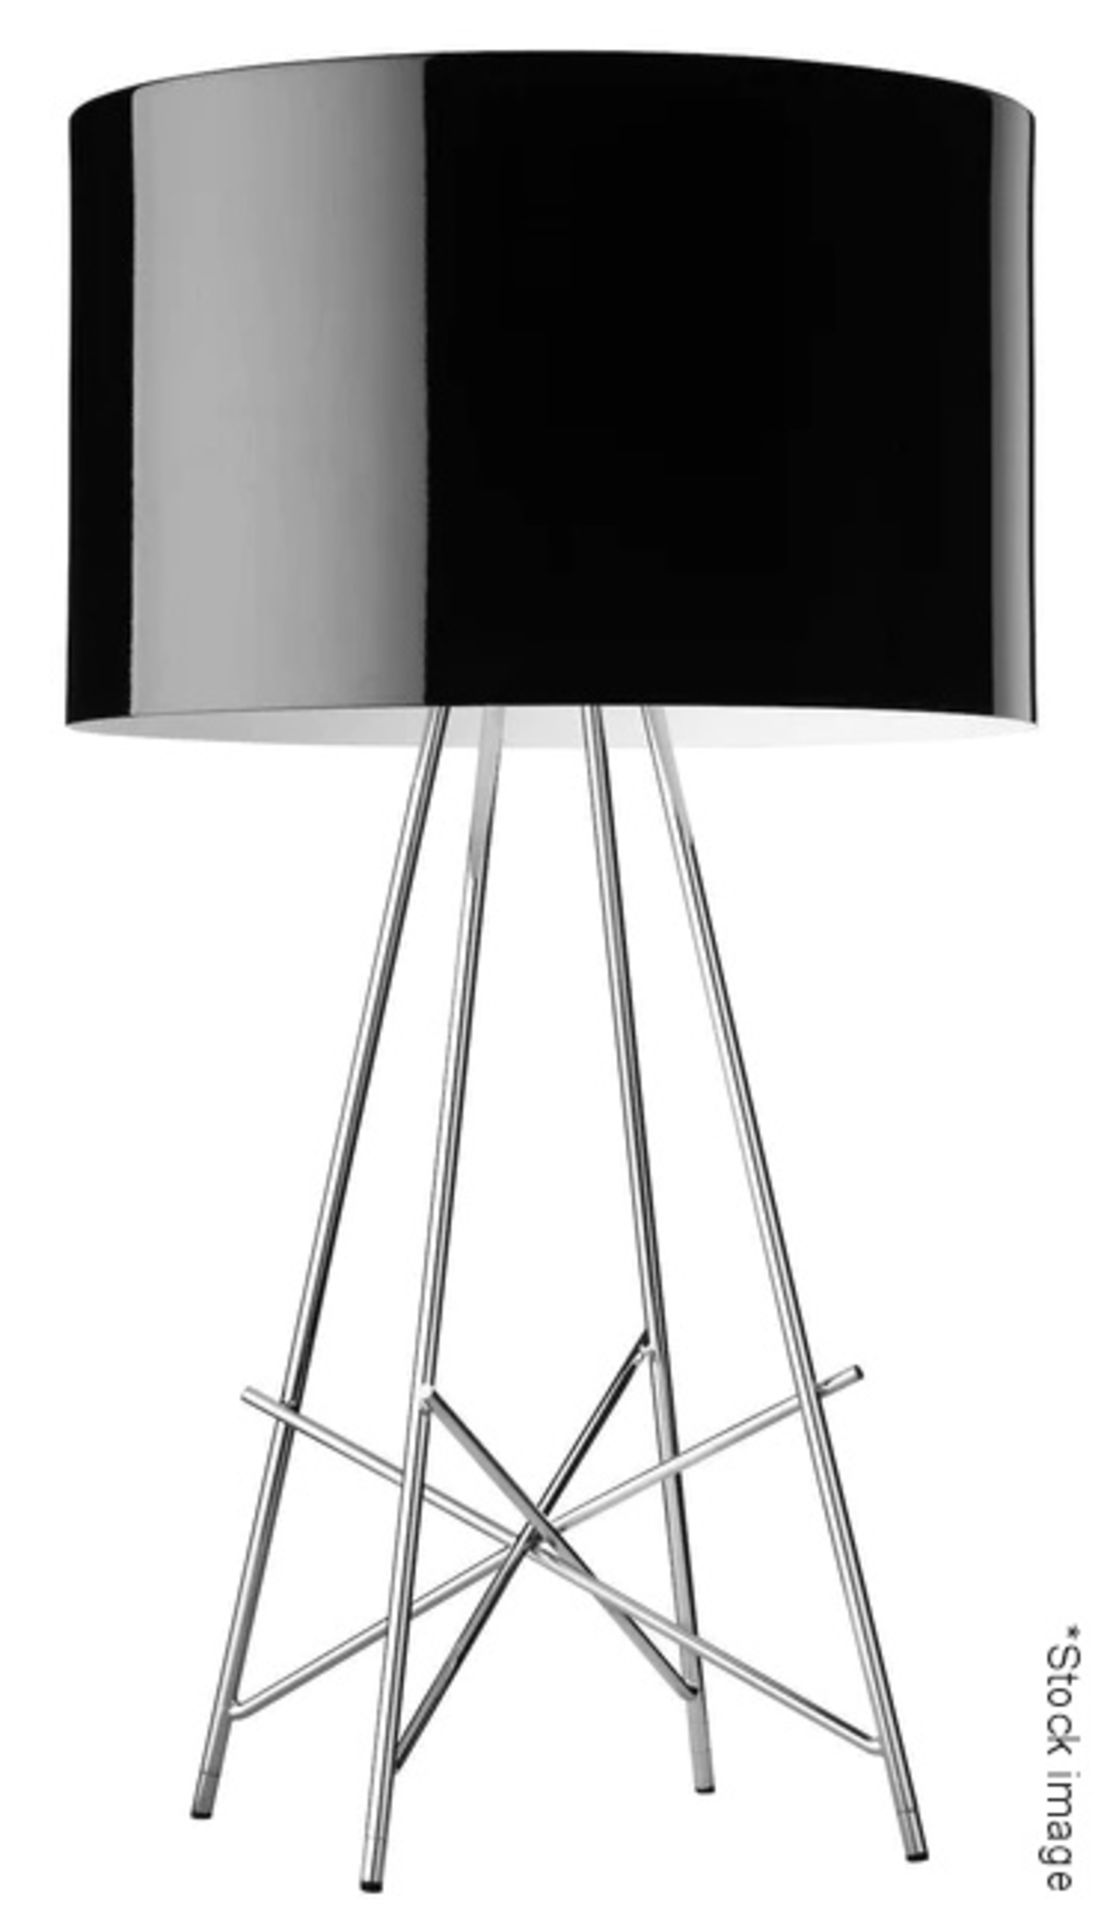 1 x FLOS 'Ray' Designer Table Lamp With Black Shade And Chrome Plated Steel Base - RRP £695.00 - Image 2 of 4